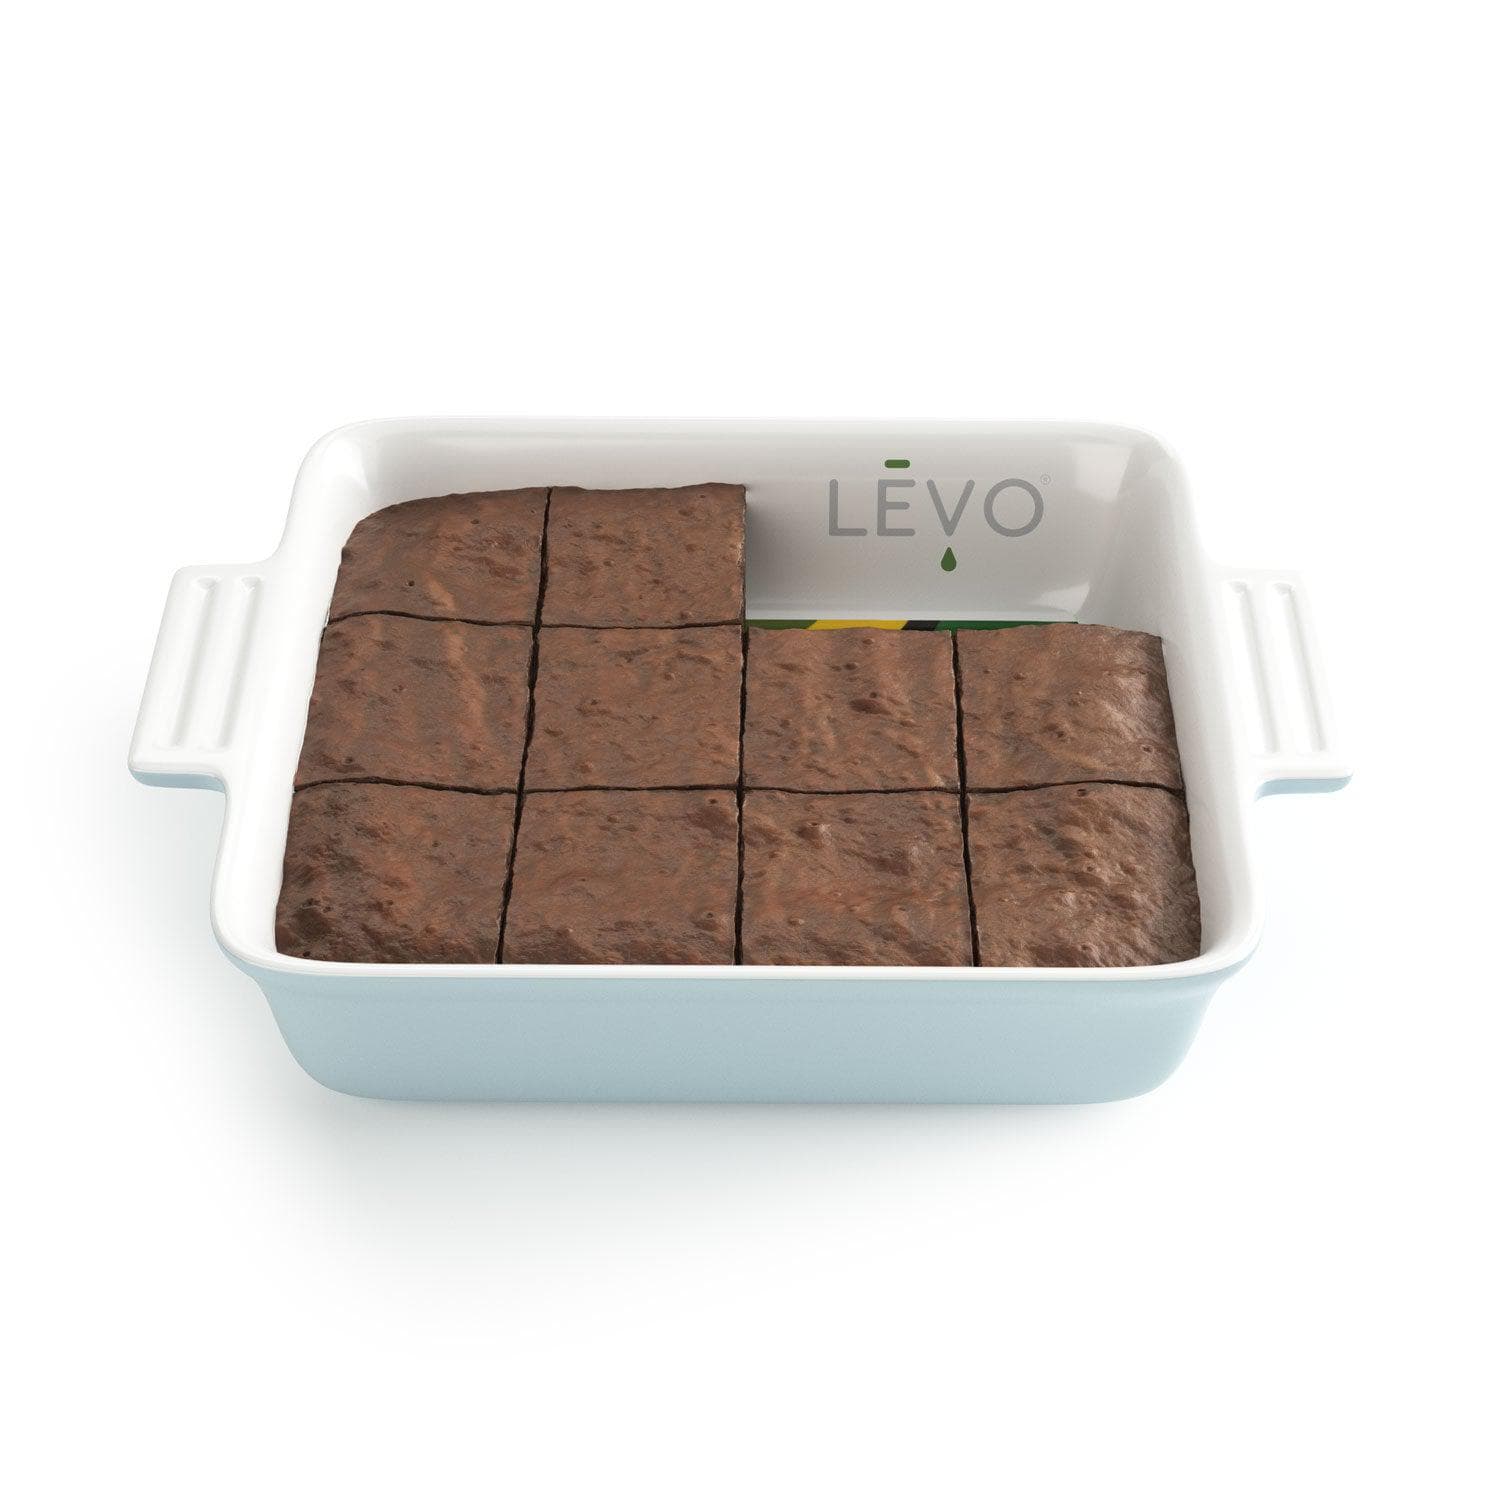 Want to bake a brownie, rice krispies treats, or infused fruit roll ups? Use the LEVO baking dish.